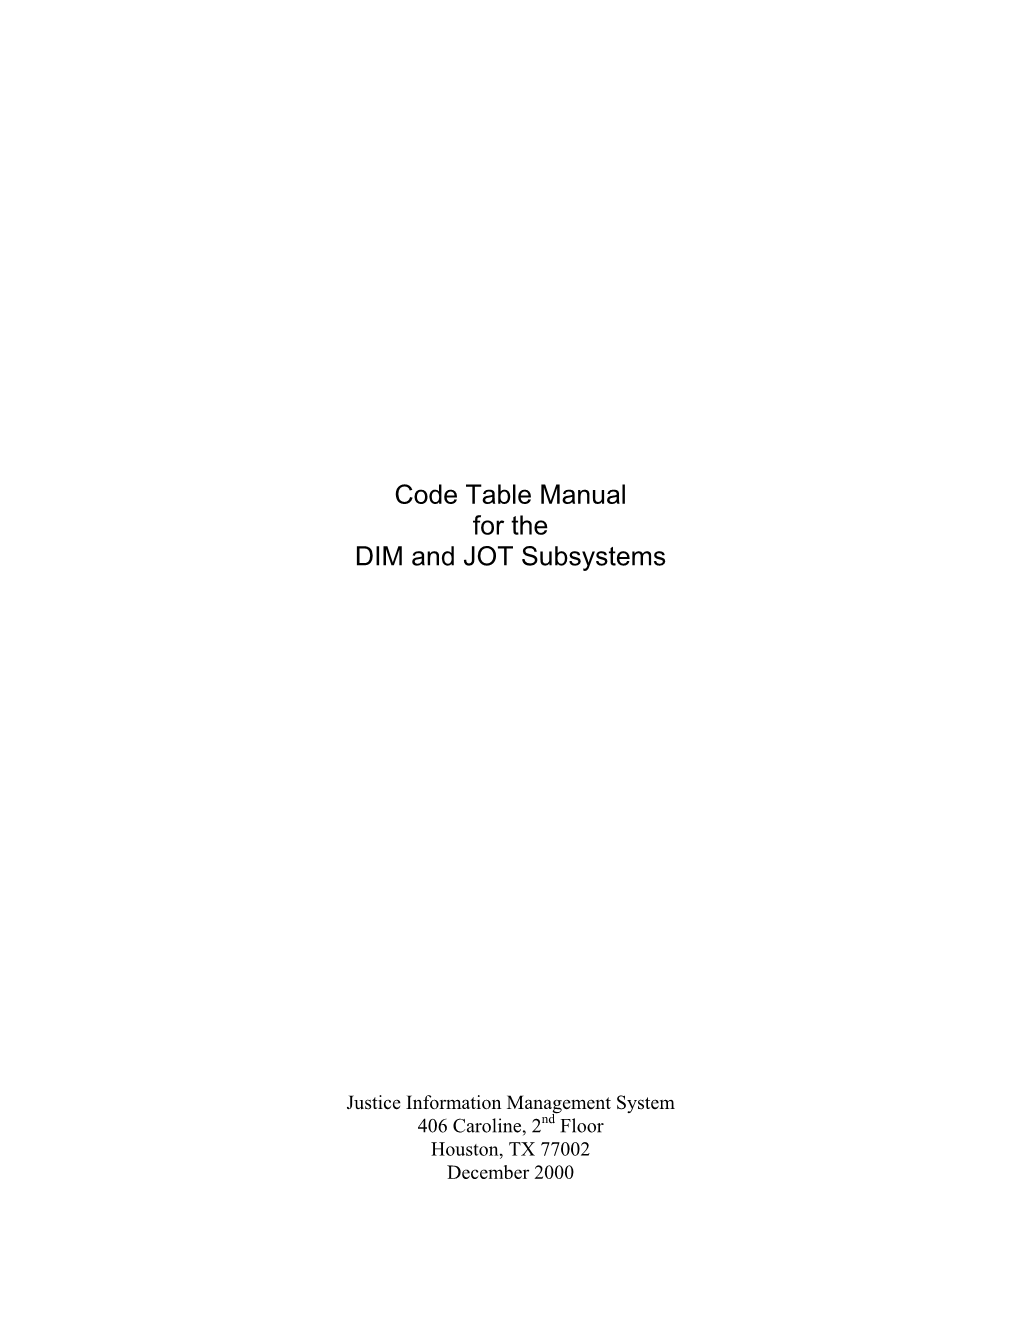 Code Table Manual for the DIM and JOT Subsystems